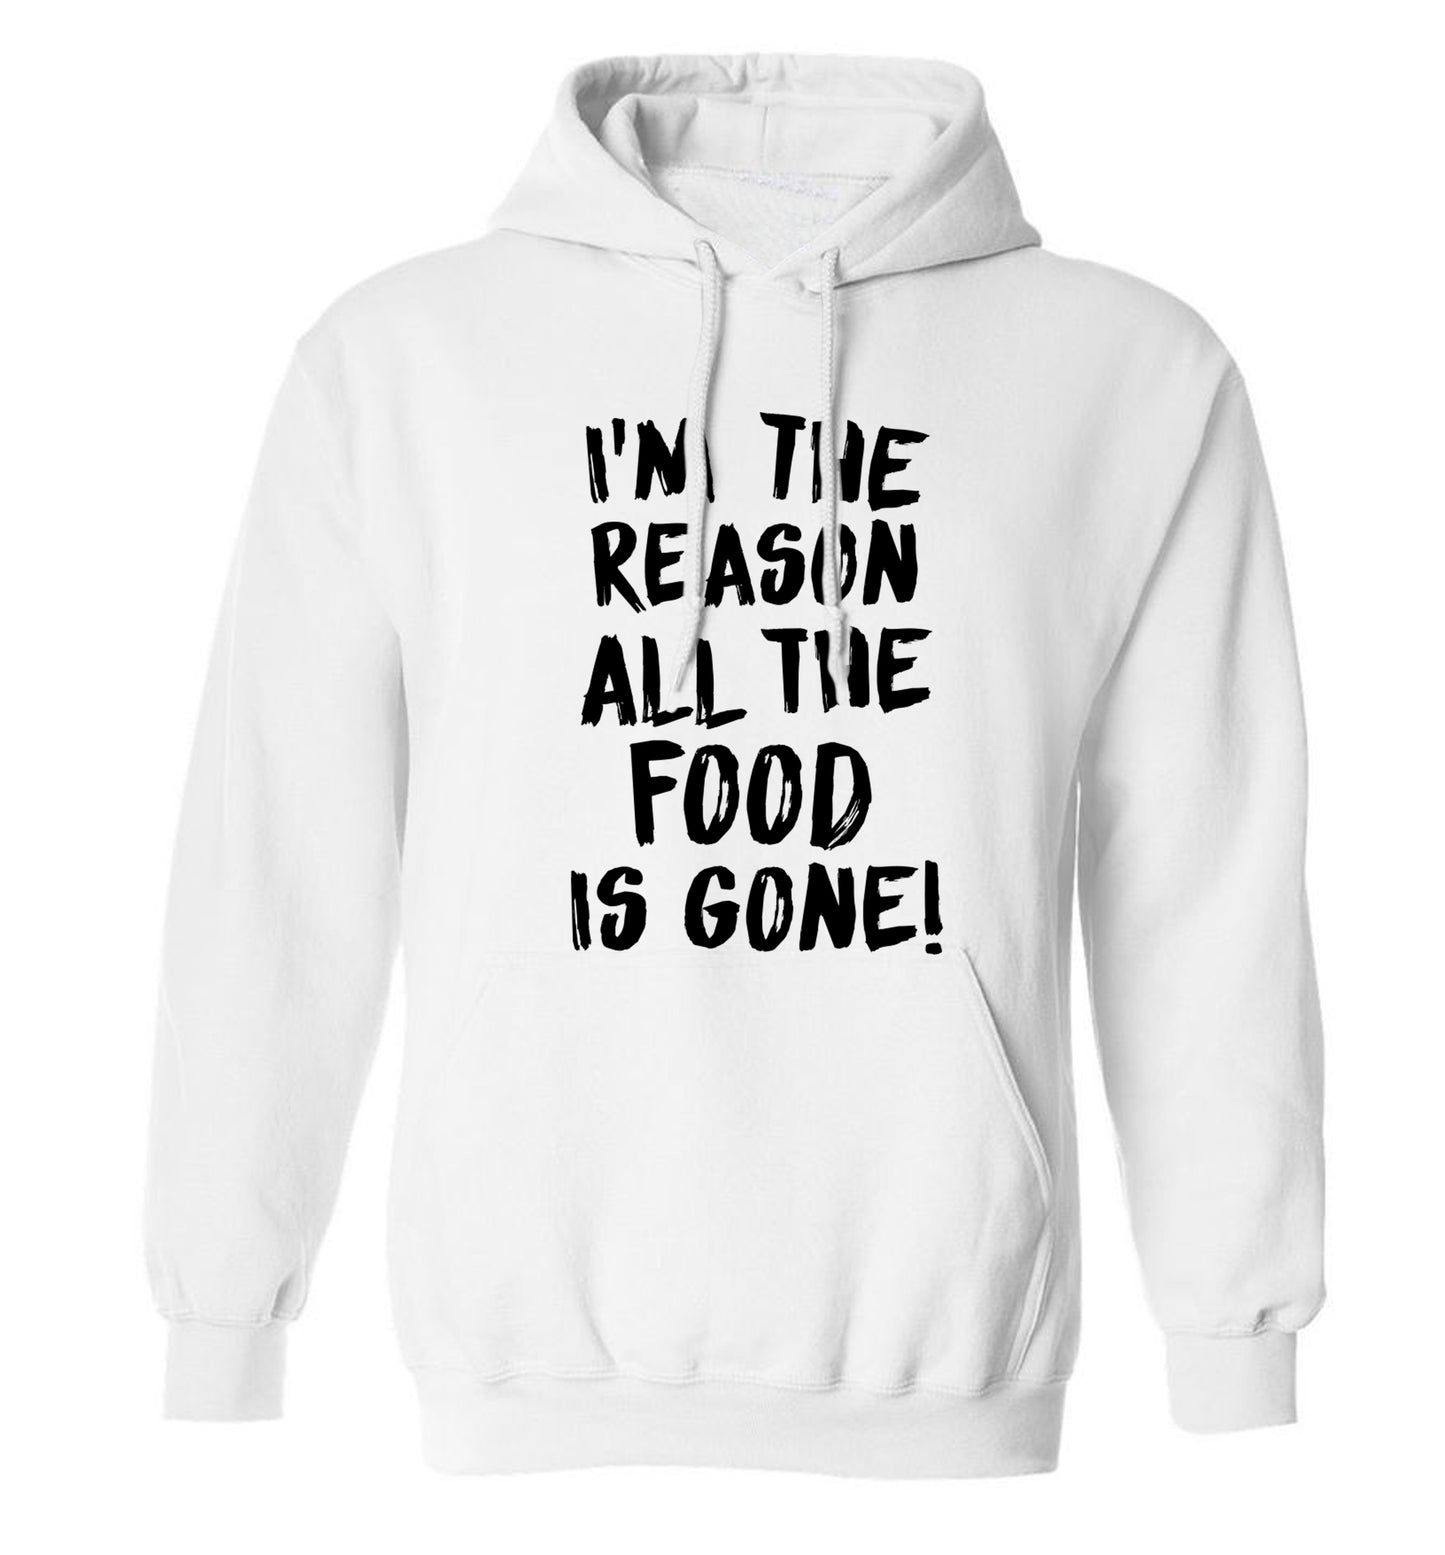 I'm the reason why all the food is gone adults unisex white hoodie 2XL